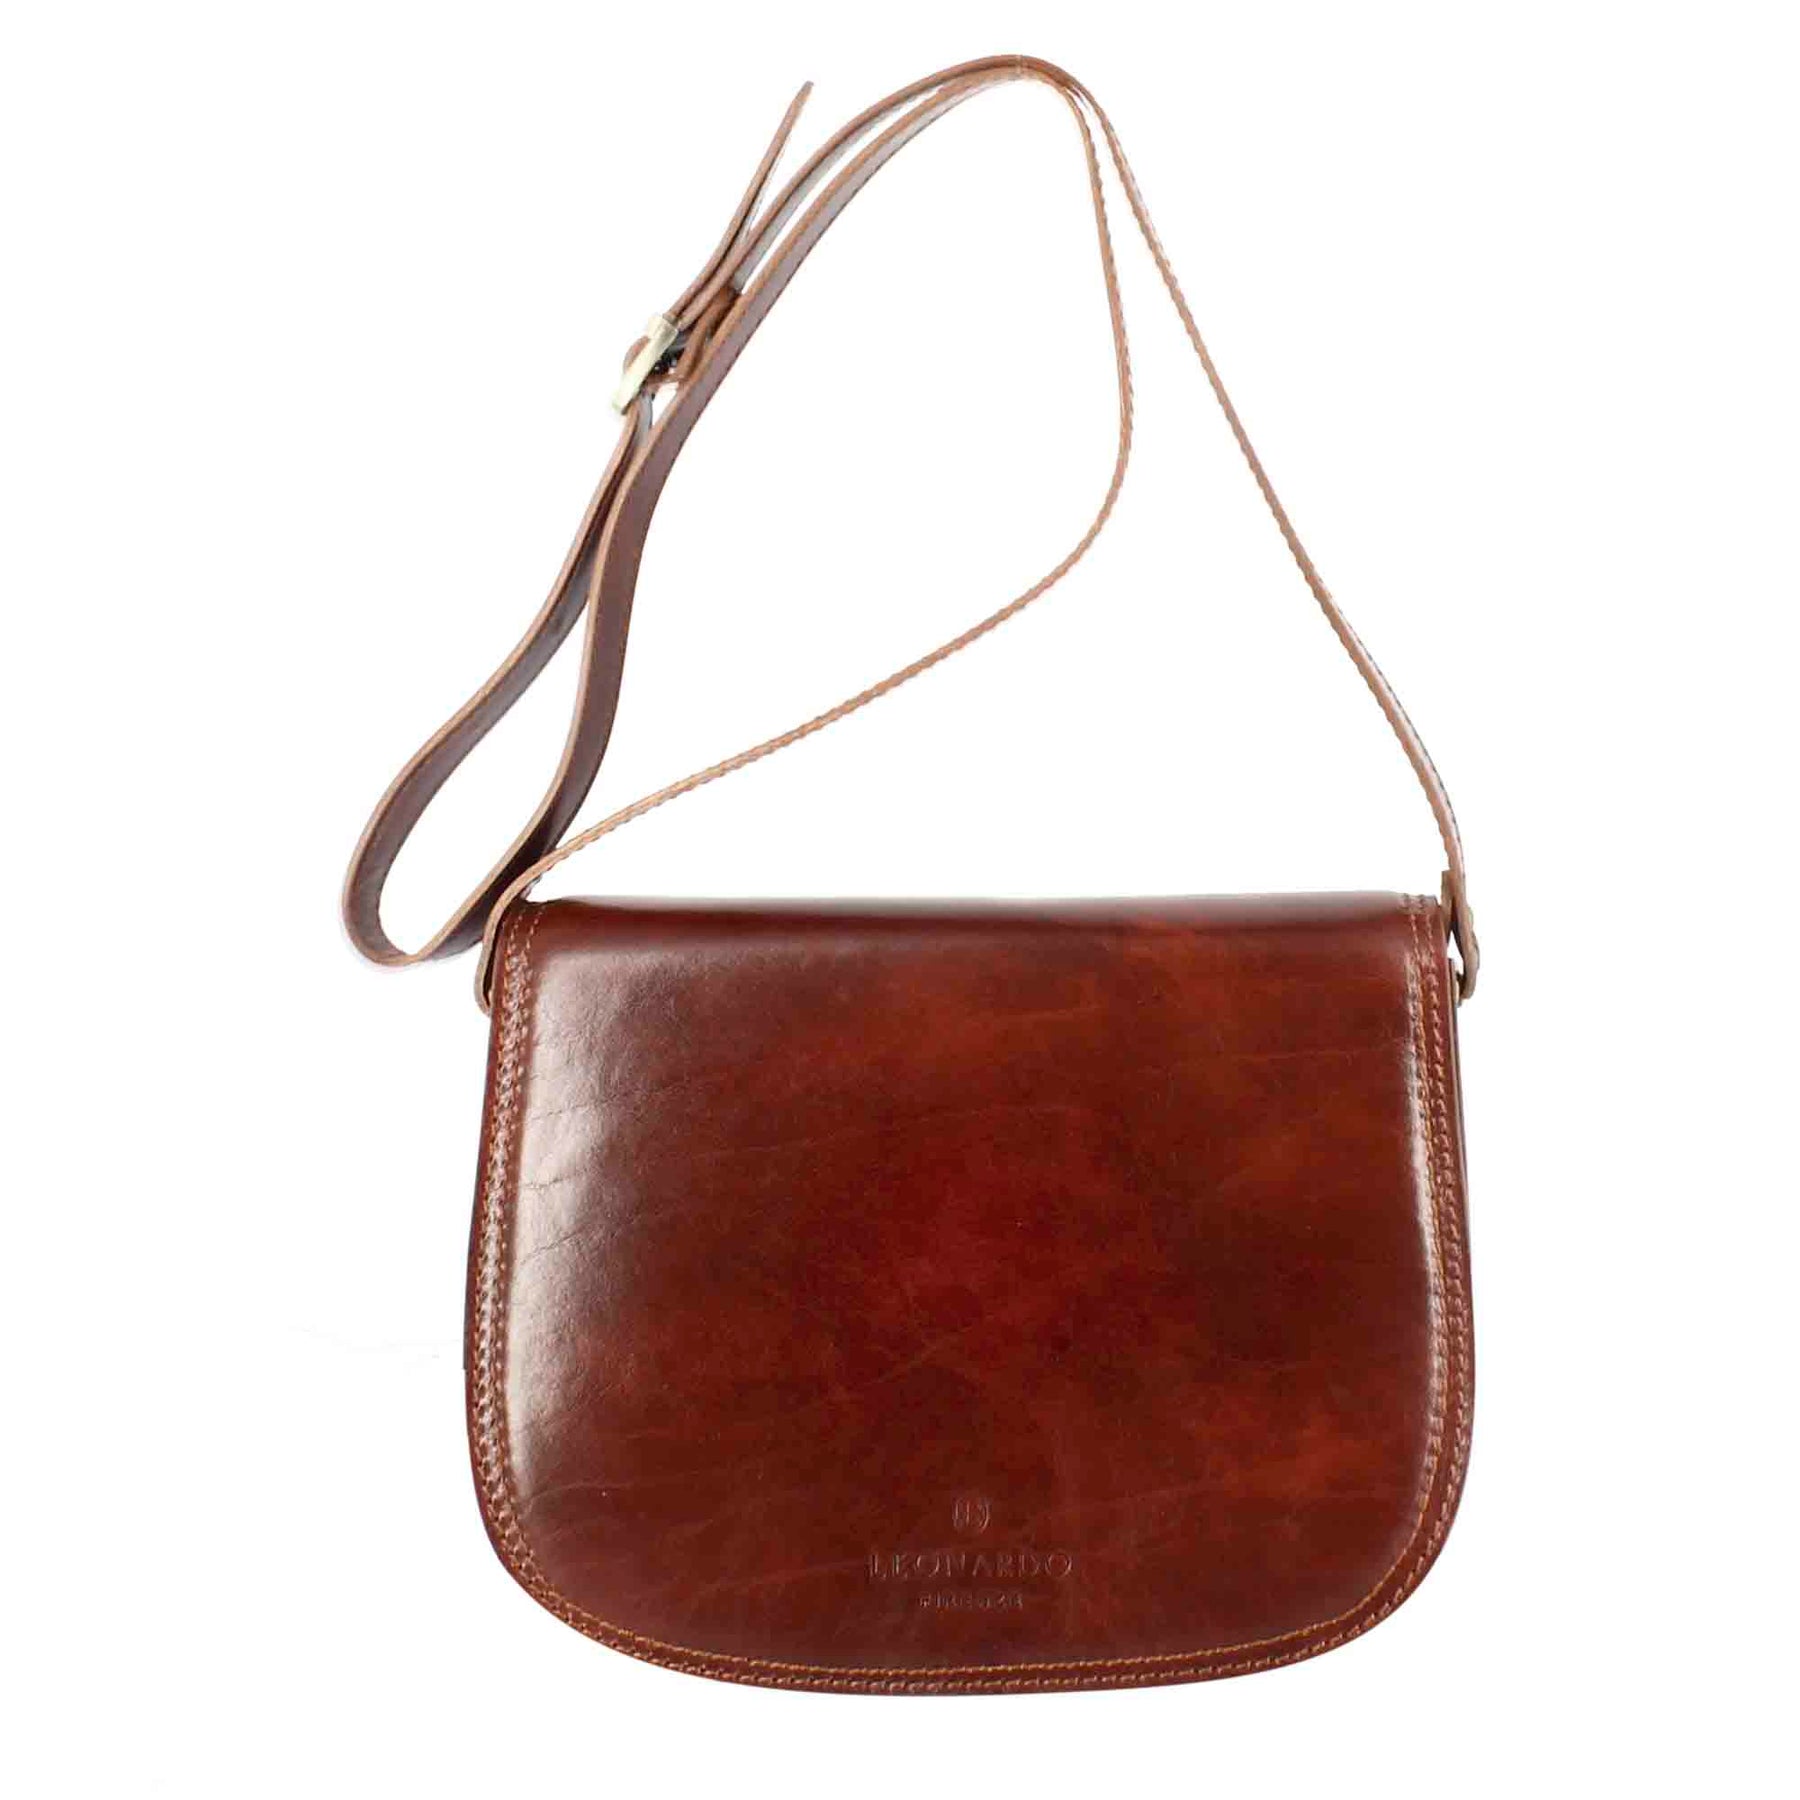 Essential women's bag in dark brown smooth leather